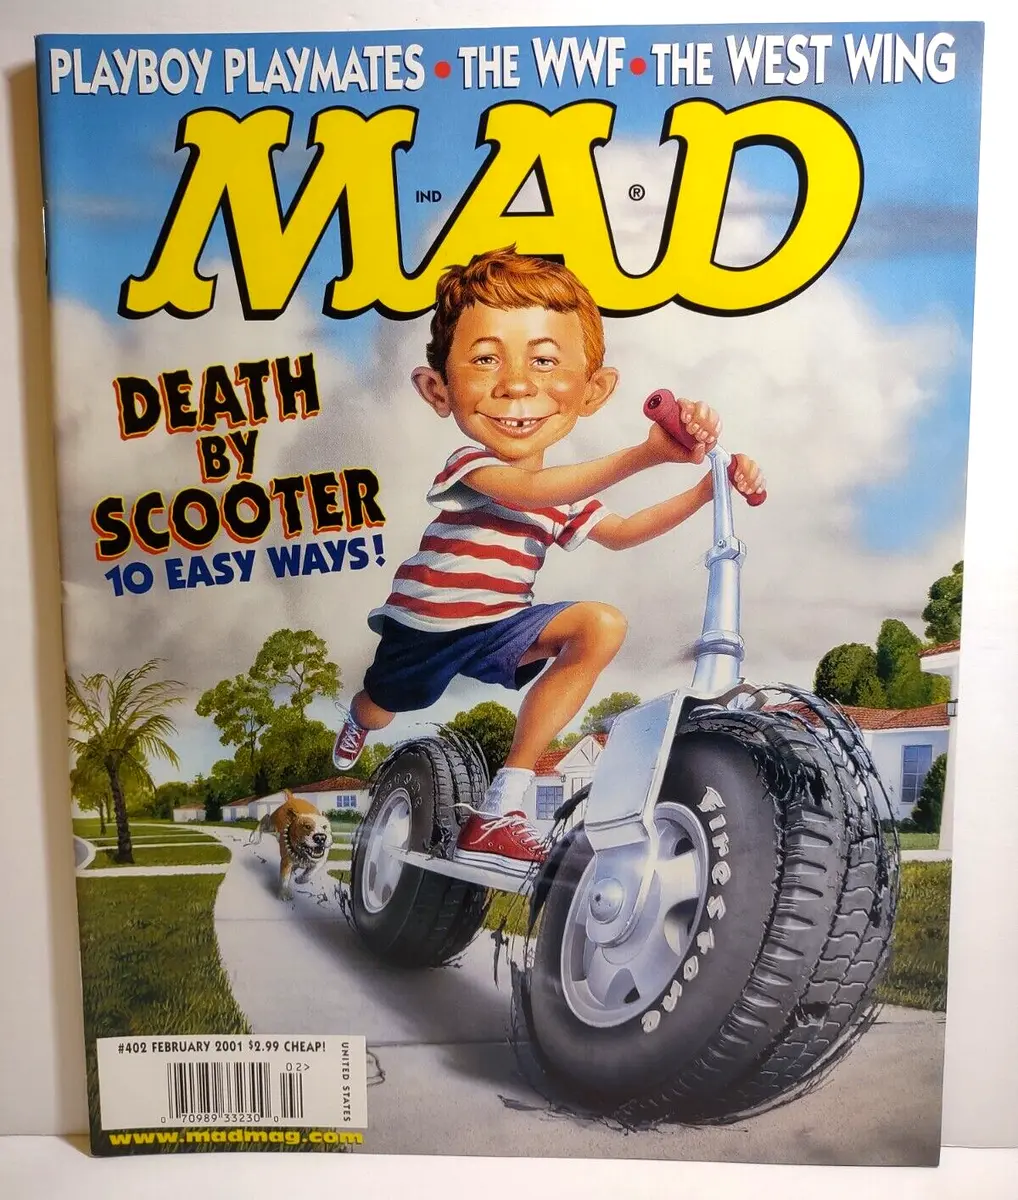 MAD Magazine Feb 2001 402 The West Wing WWF Death By Scooter Parody | eBay